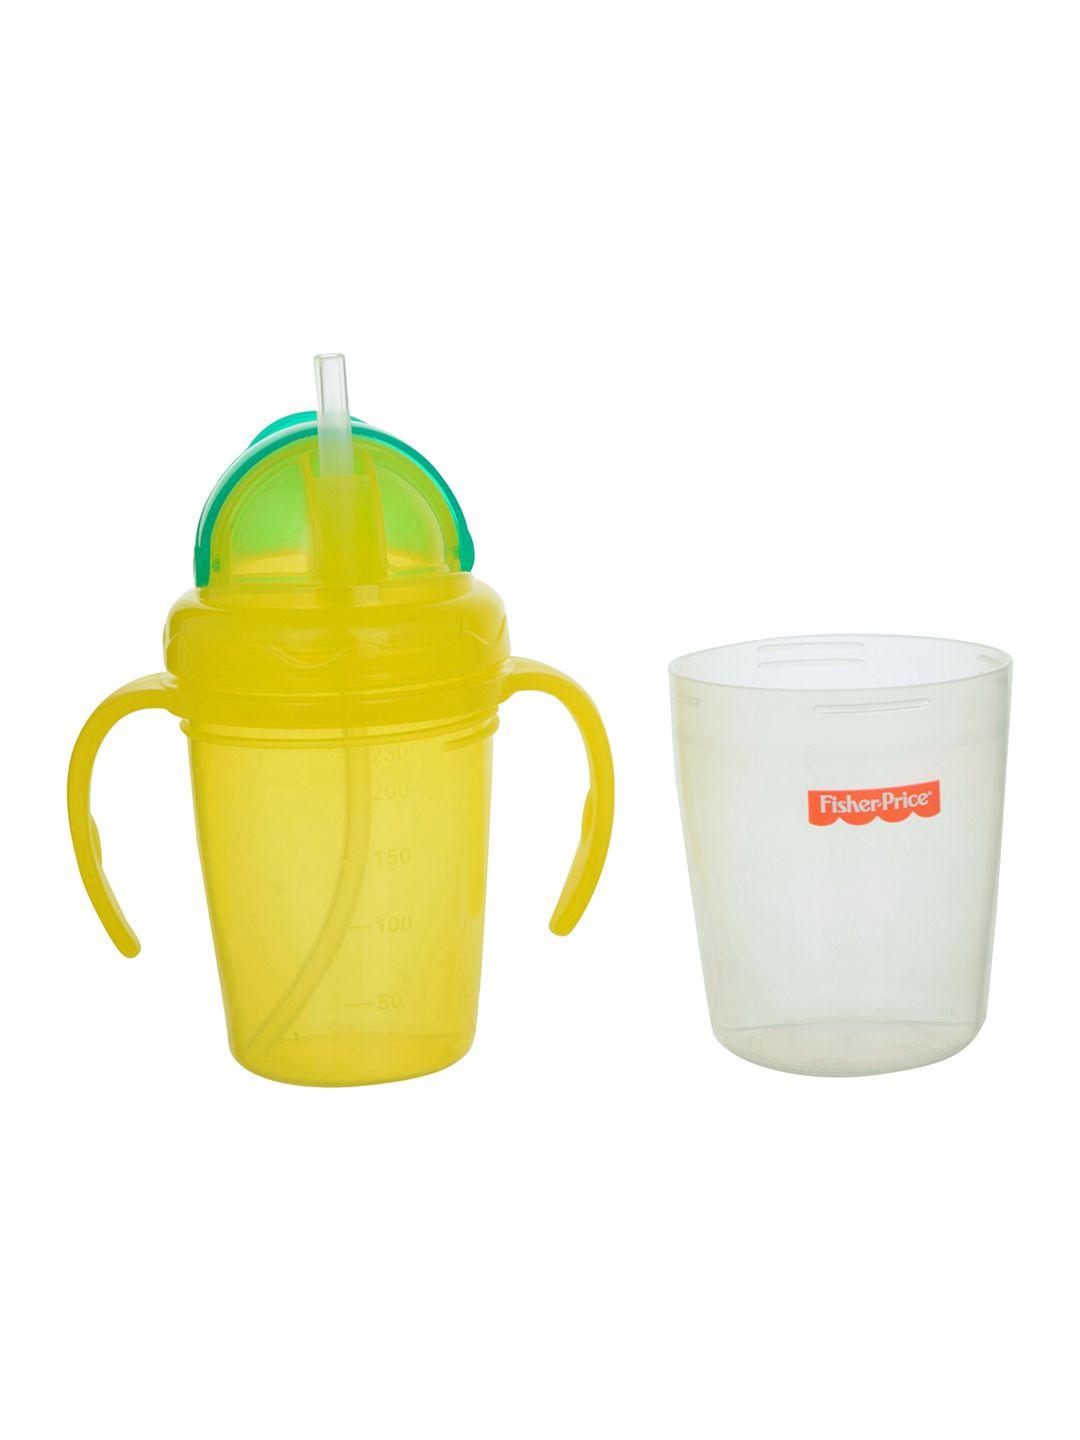 fisher-price yellow double wall baby sipper with training cup